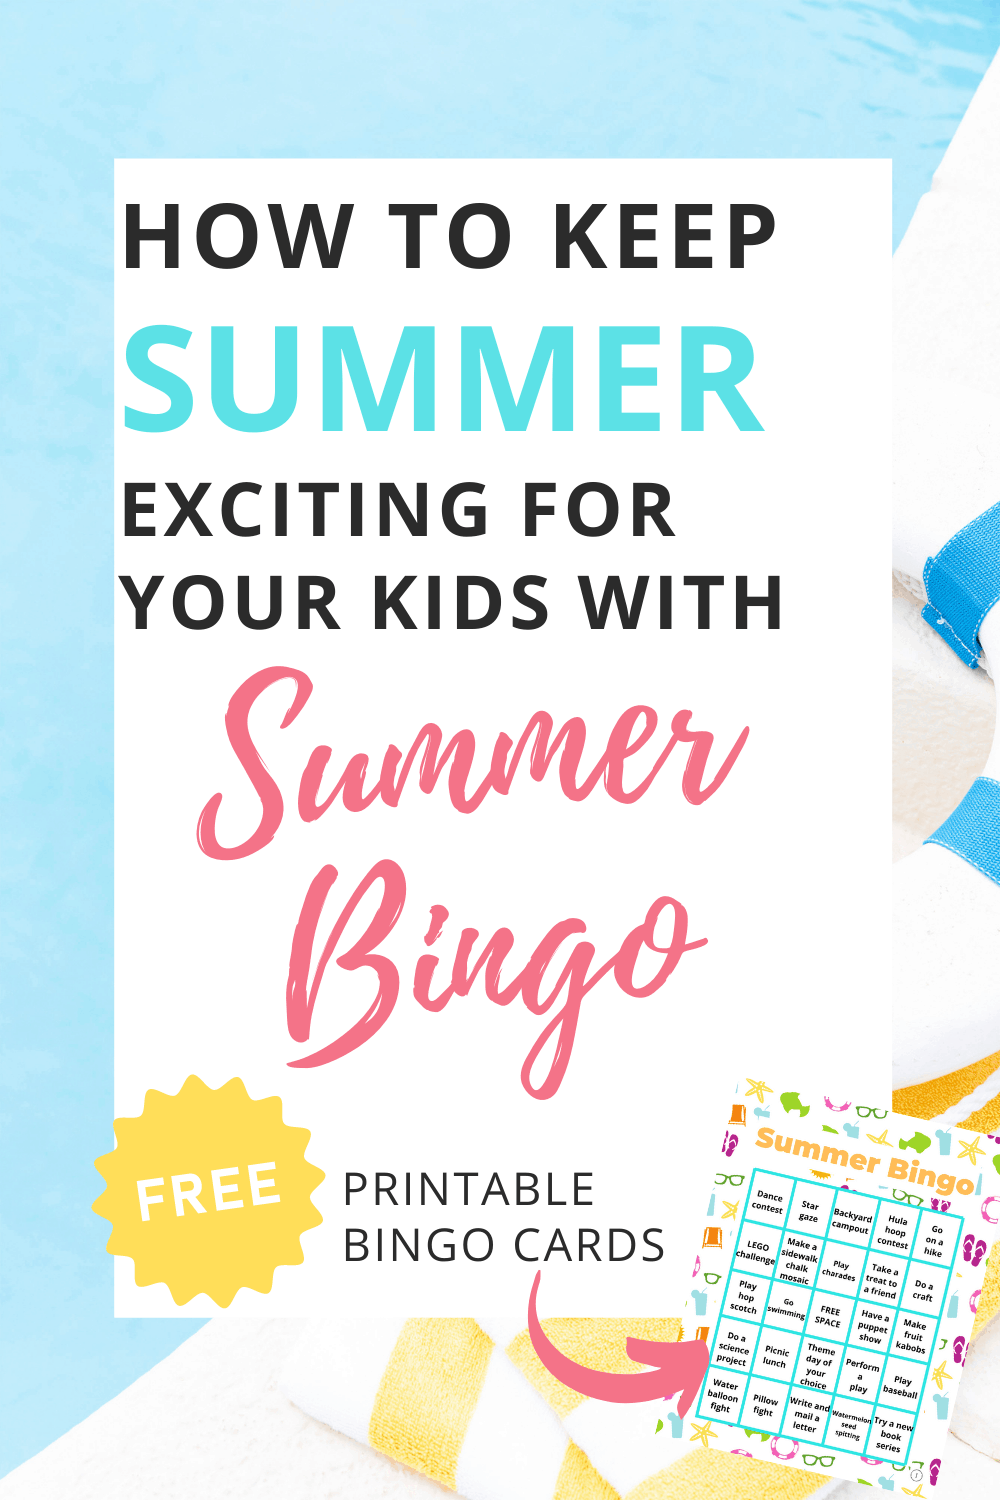 How to Keep Summer Exciting for Your Kids by Playing Summer Bingo